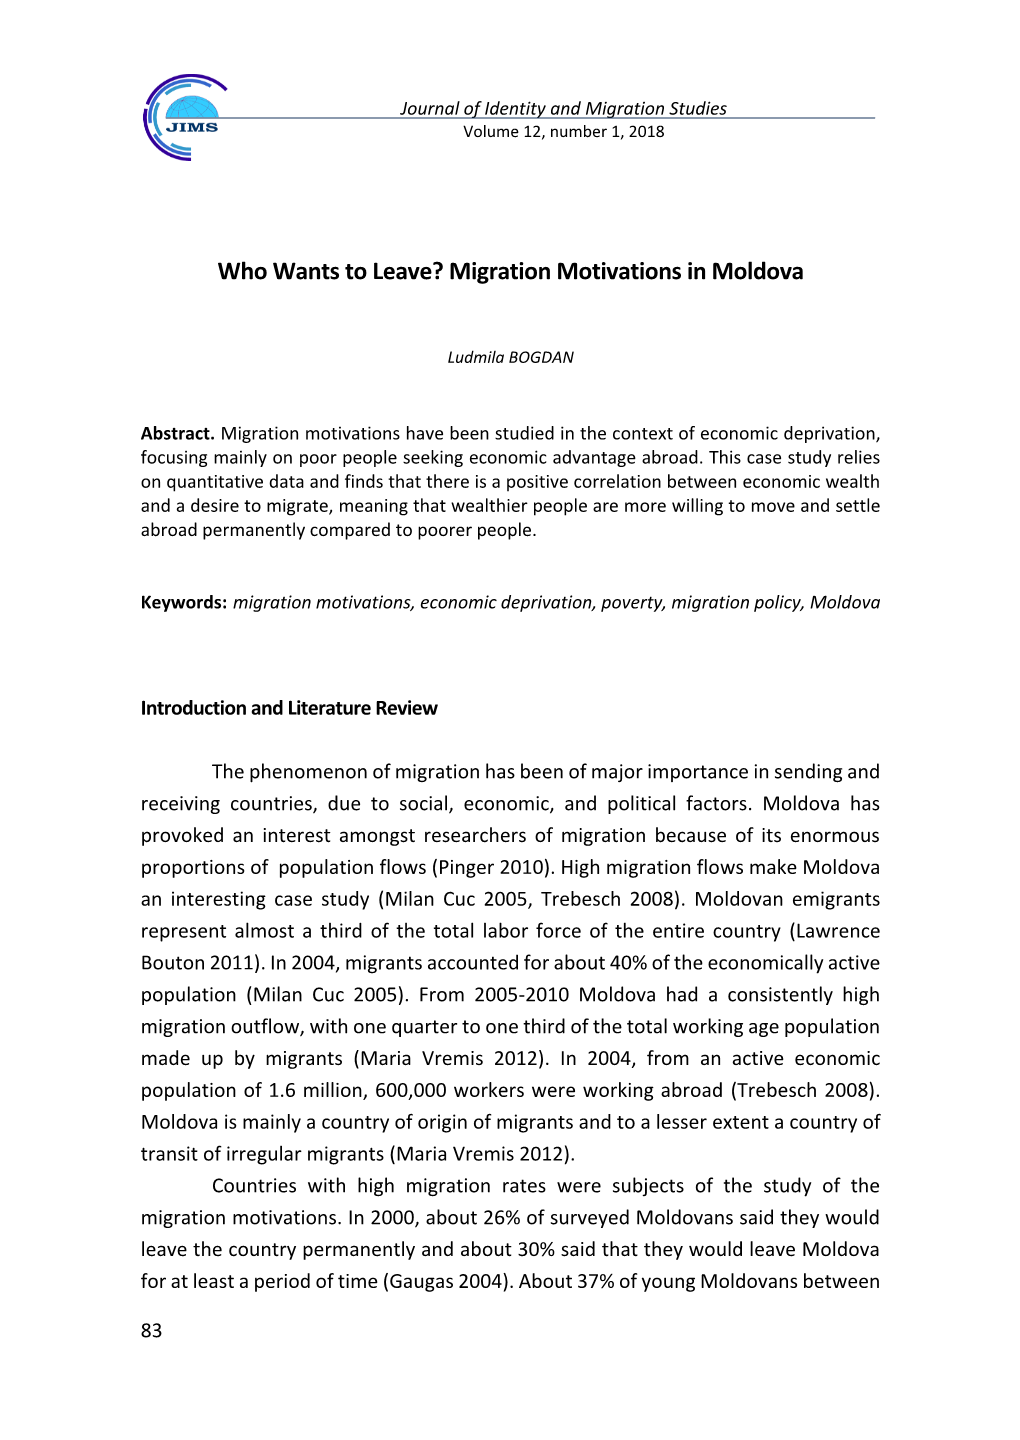 Who Wants to Leave? Migration Motivations in Moldova